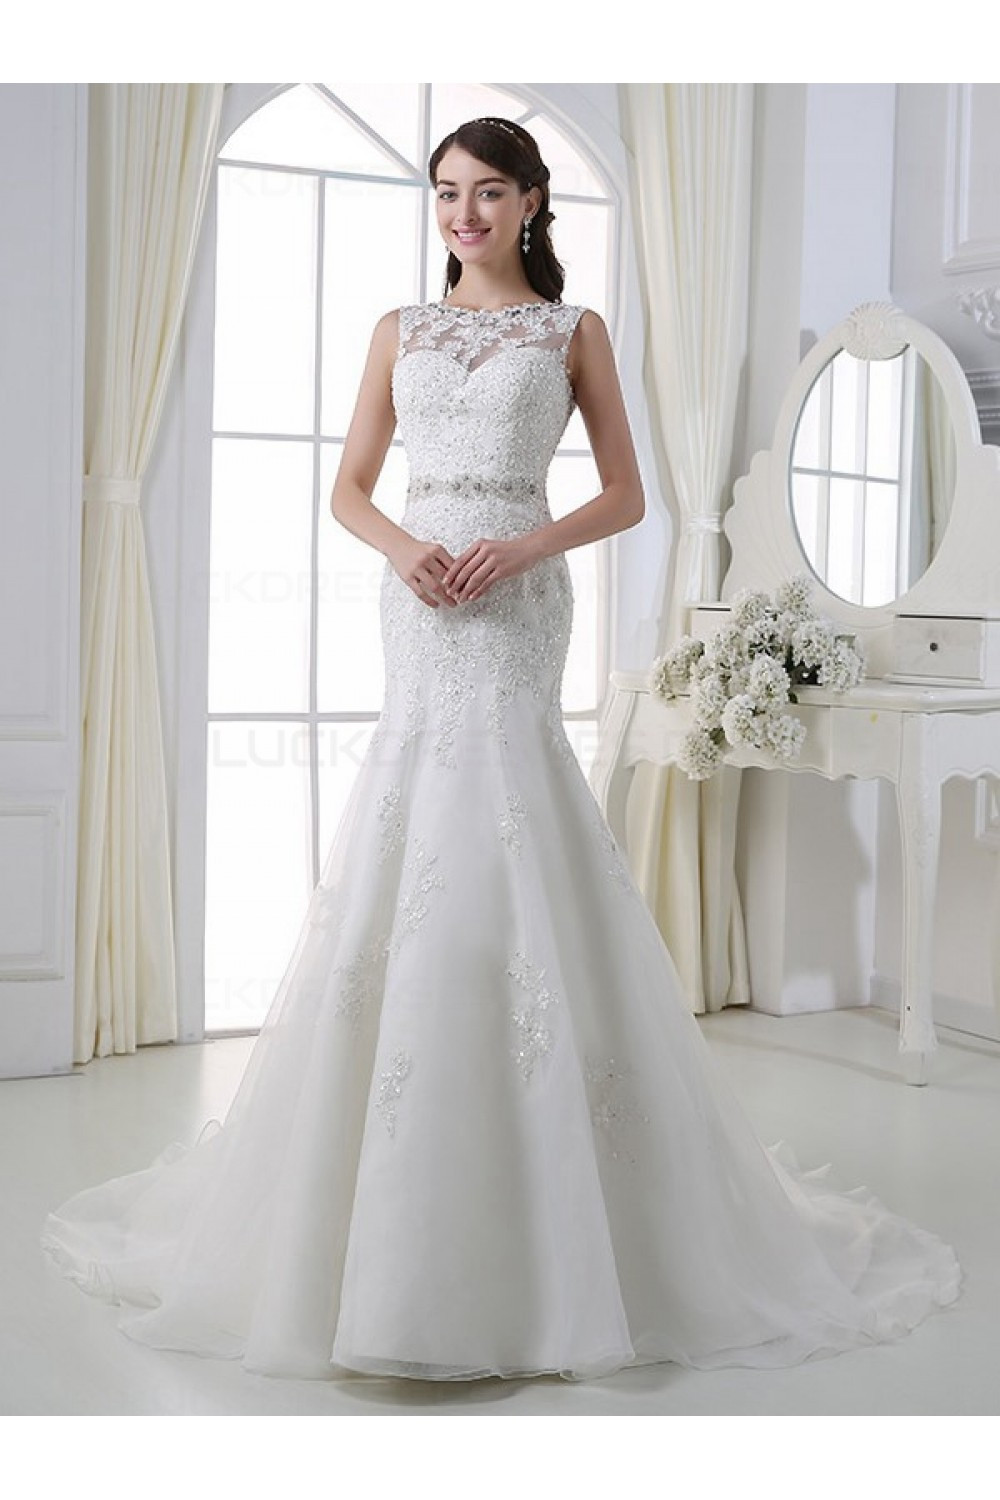 Lace Designer Wedding Gowns
 Mermaid Sleeveless Lace Wedding Dresses Bridal Gowns